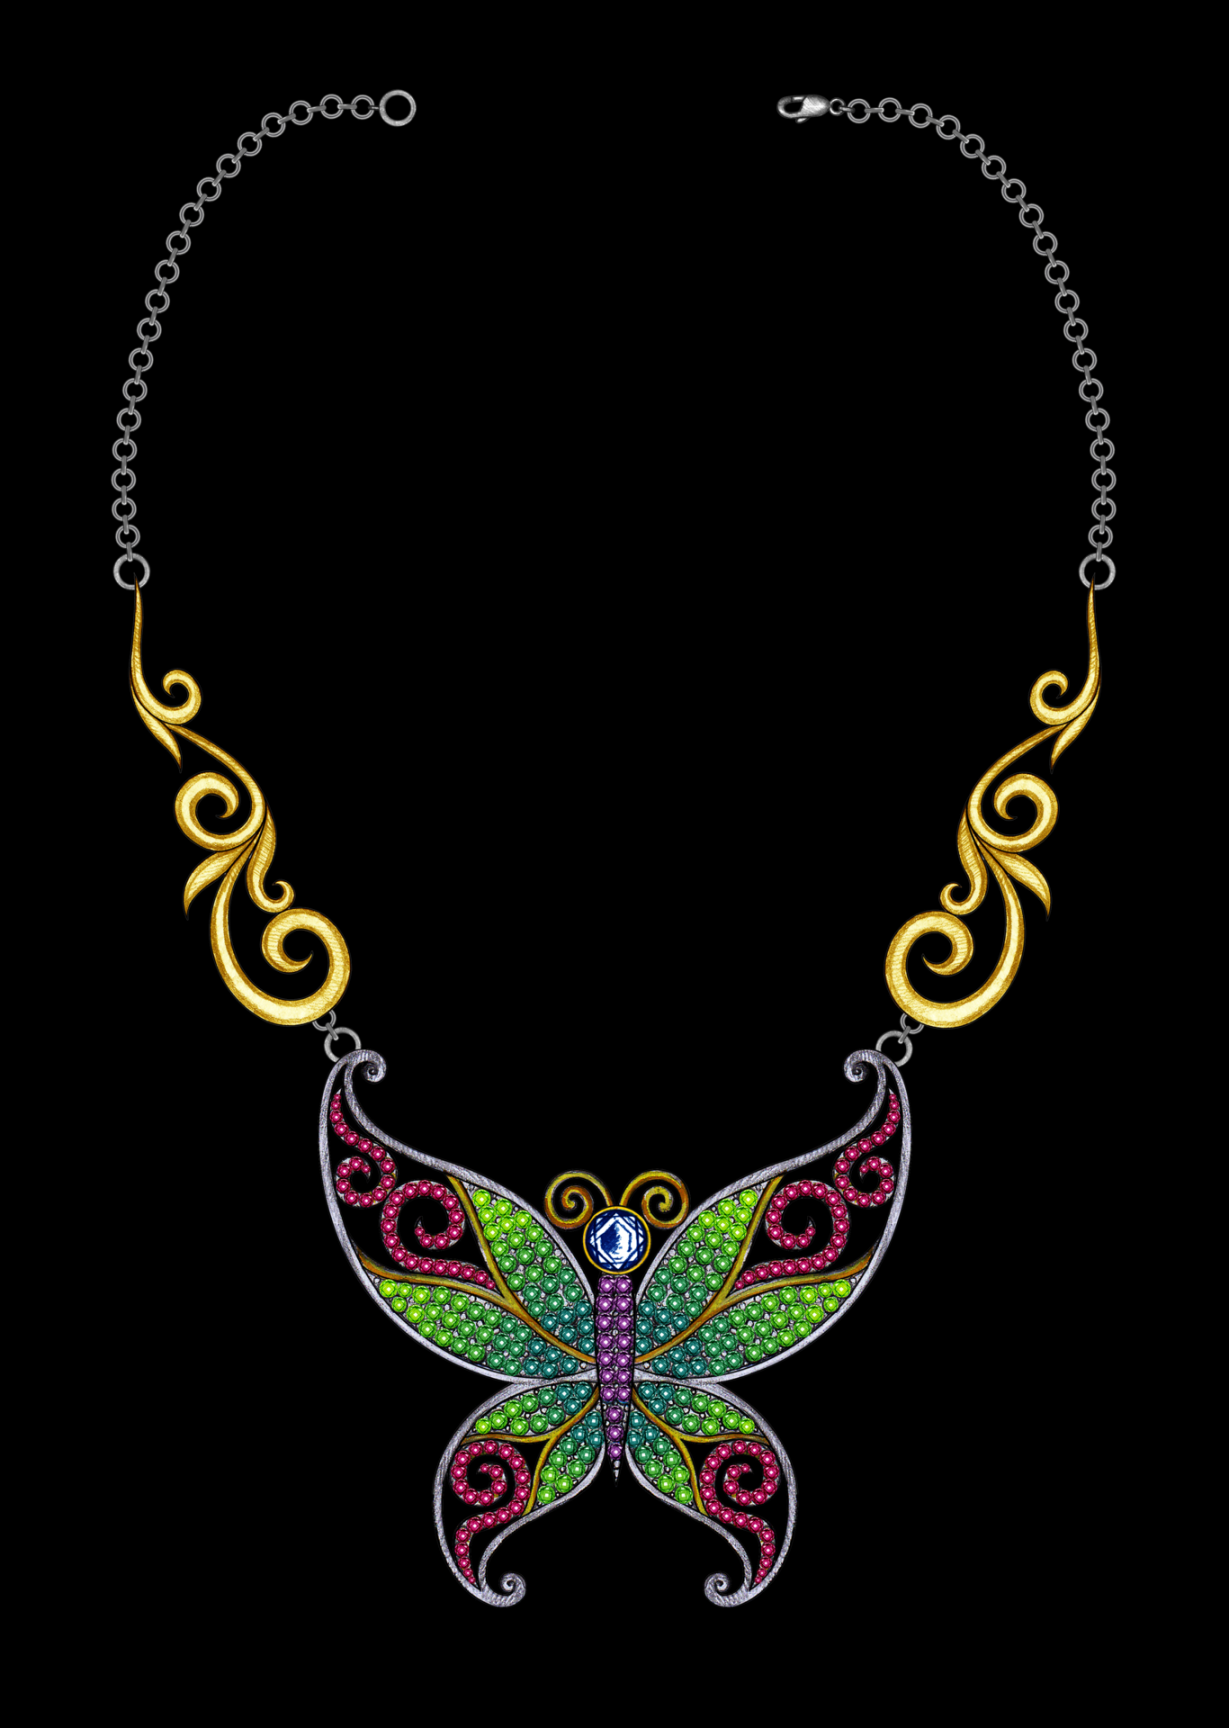 Jewelry design art vintage butterfly necklace